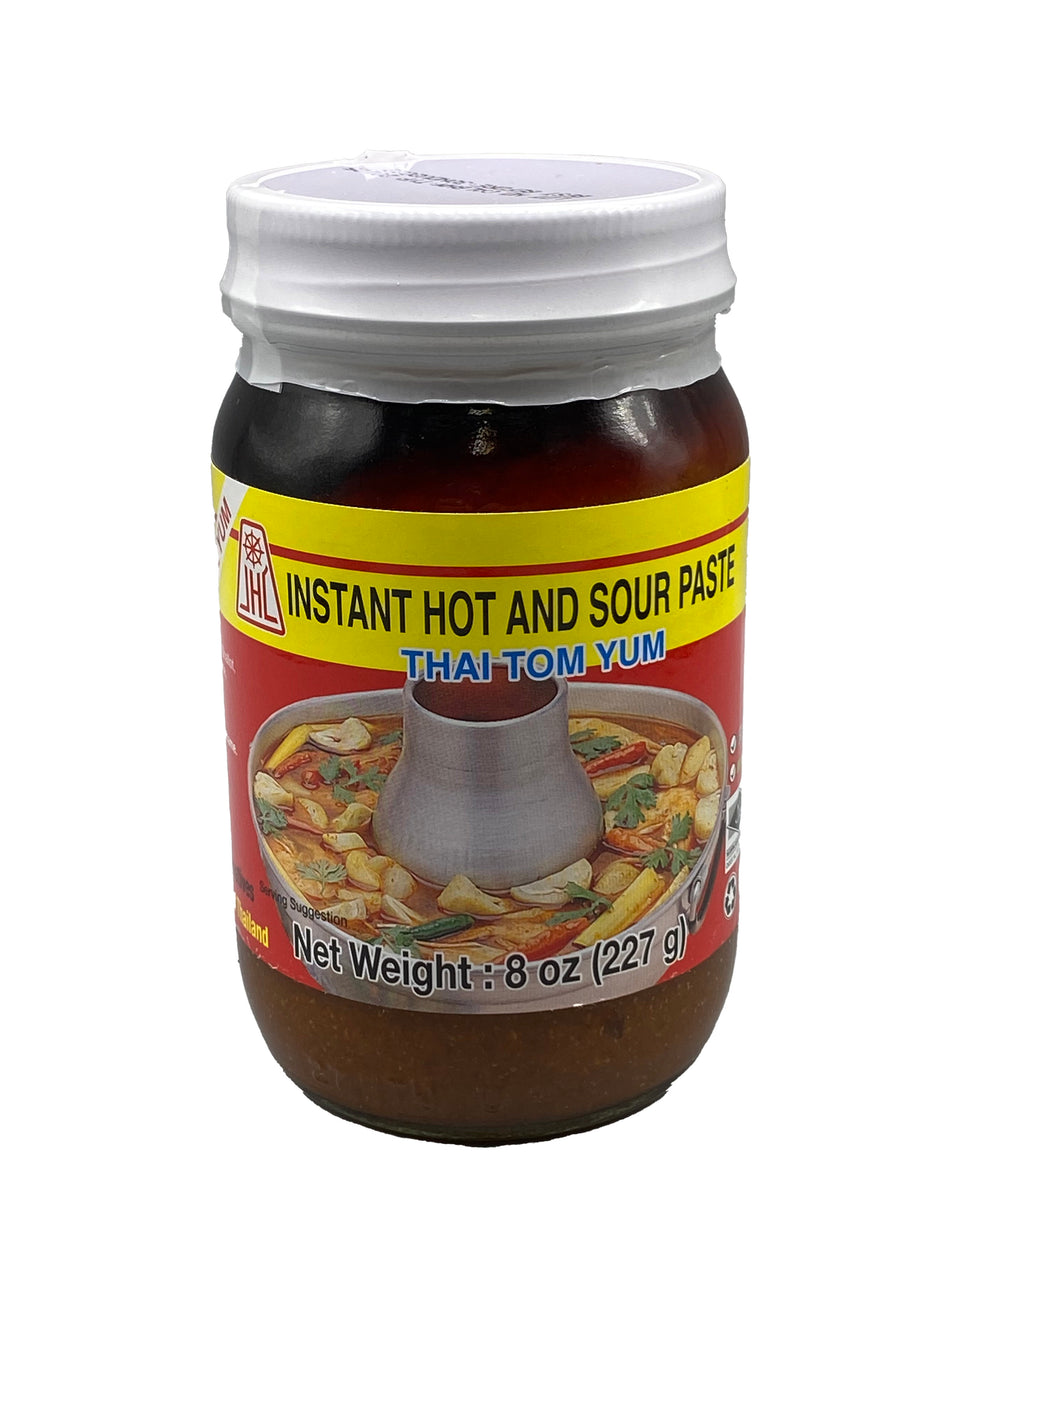 JHC Instant Hot and Sour Paste (Thai Tom Yum)